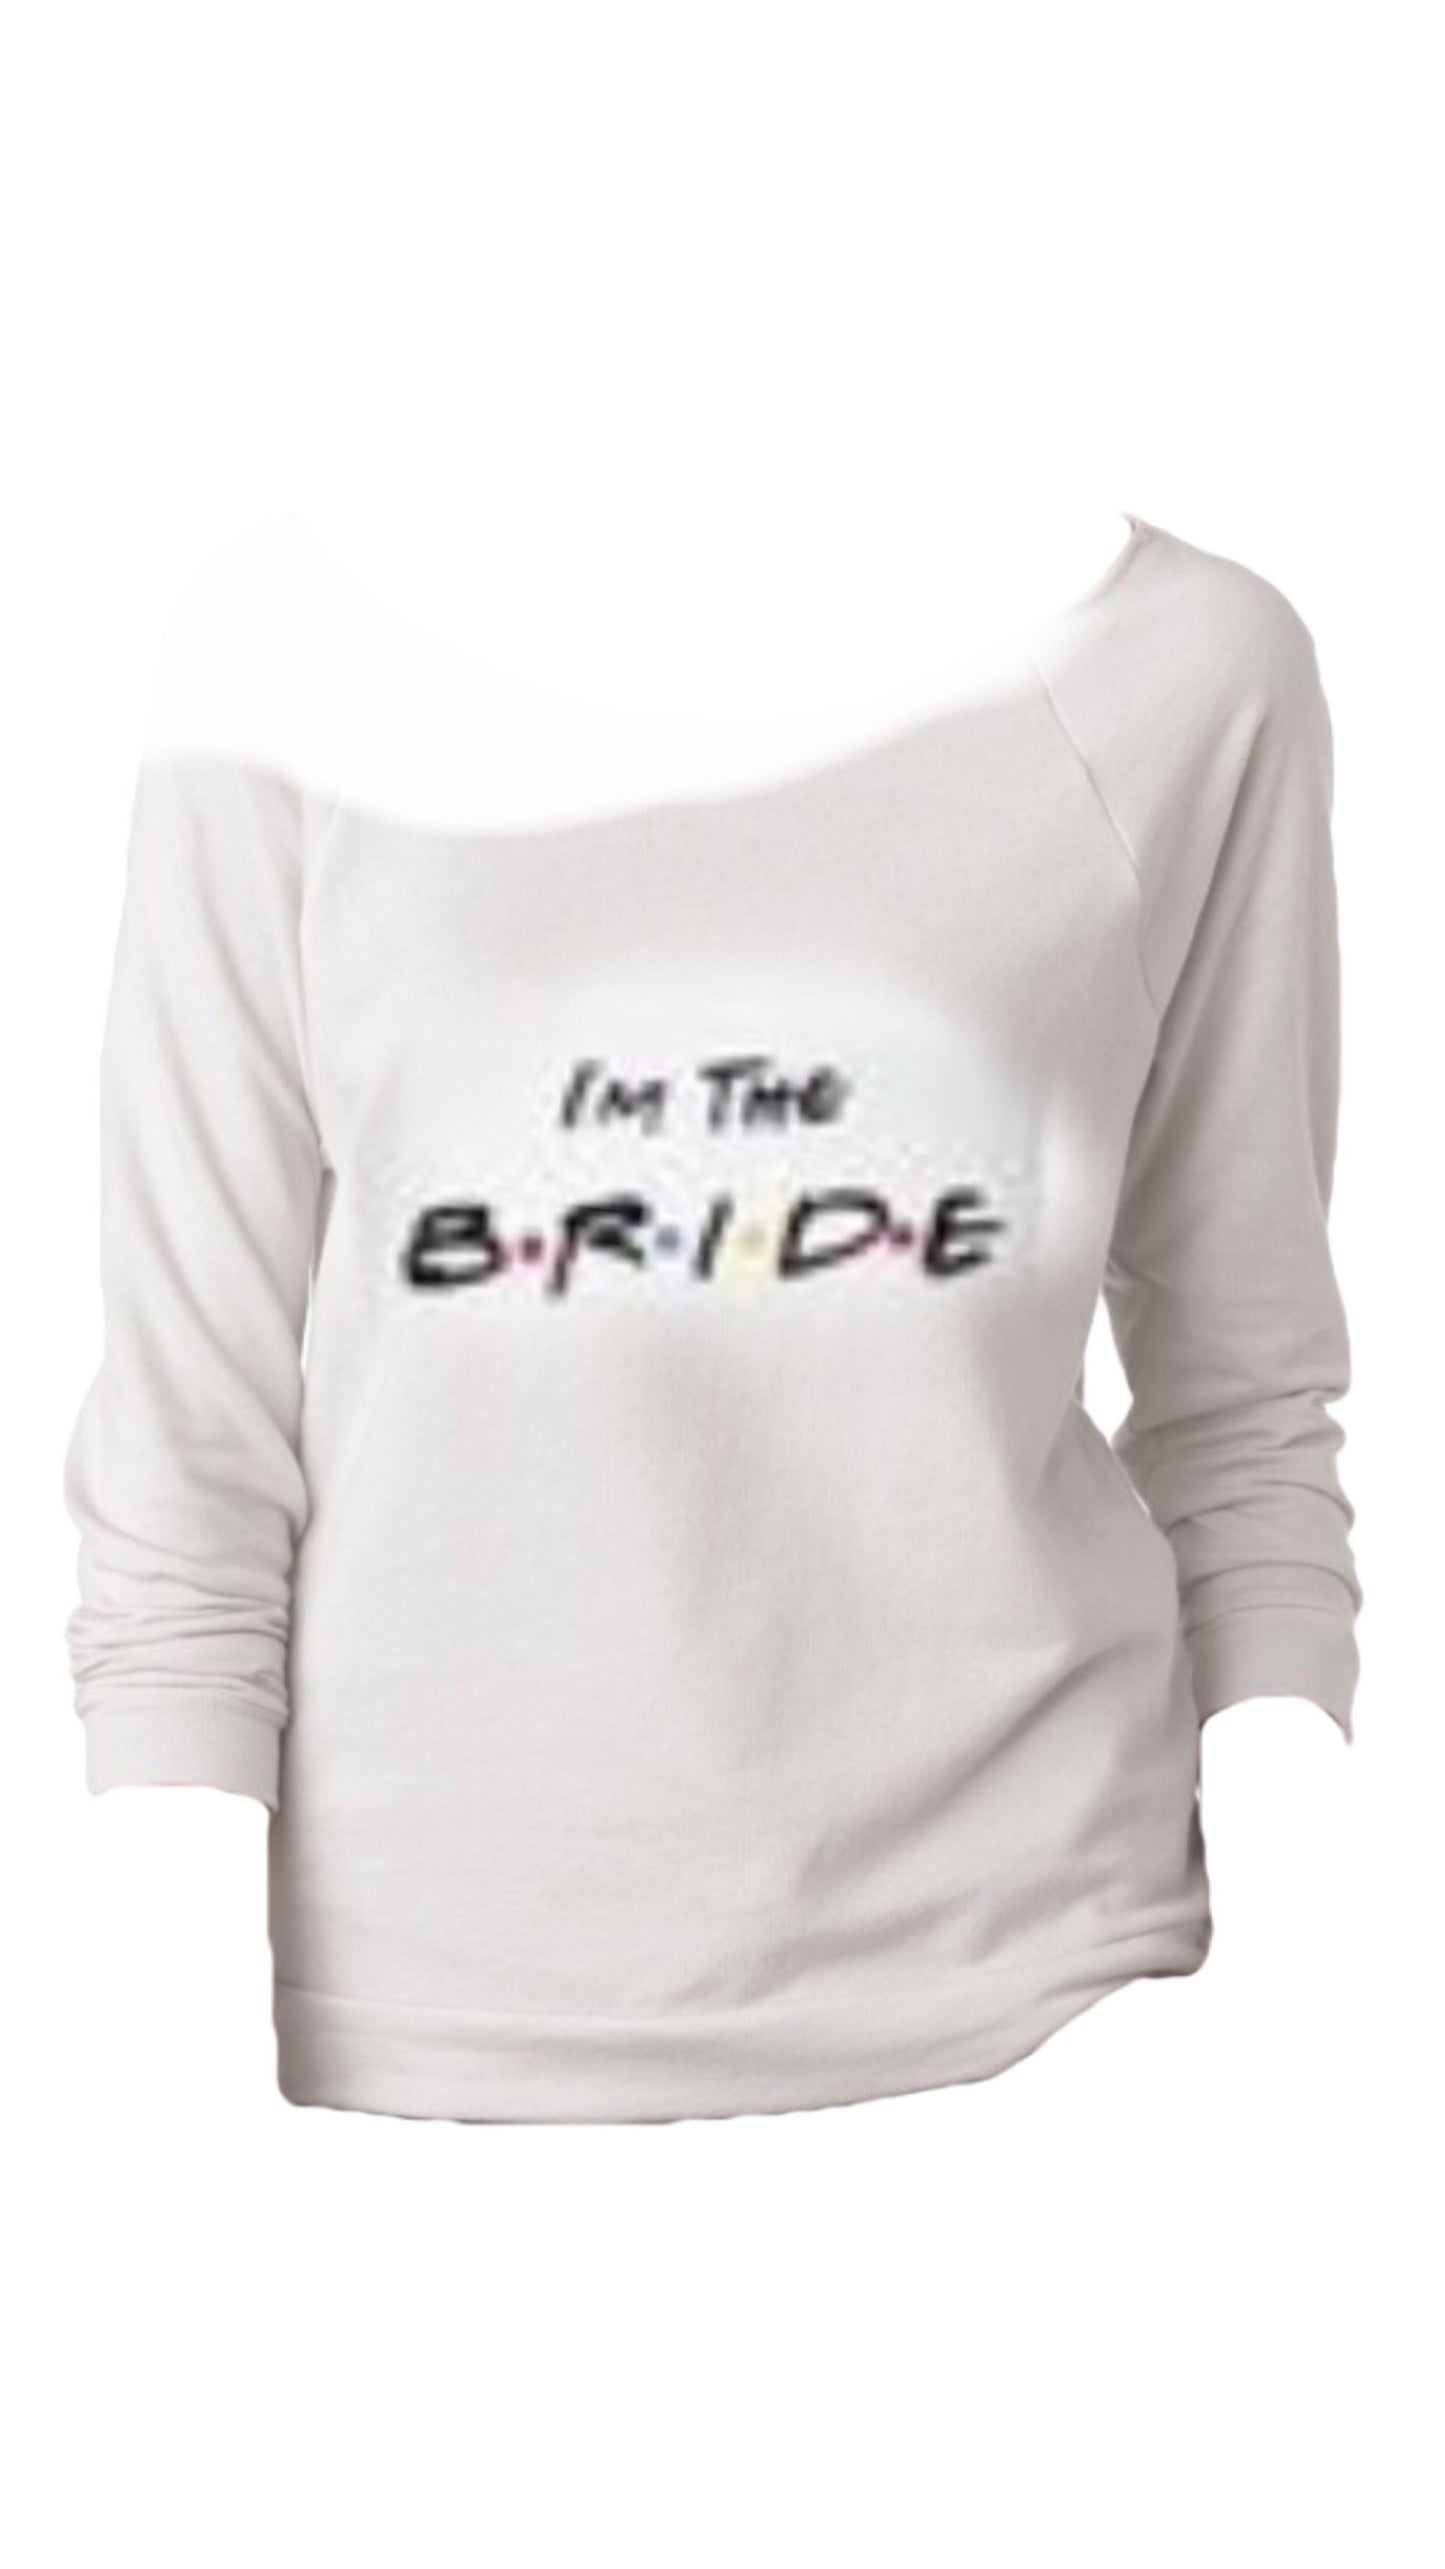 Friends Bride and Bridesmaid Shirts| We'll be there for you shirts| Friends TV| Bride shirts| Bridesmaid Shirts| Wedding party gift| Bachelorette party shirts| Bridesmaid Gifts| Bride Shirt